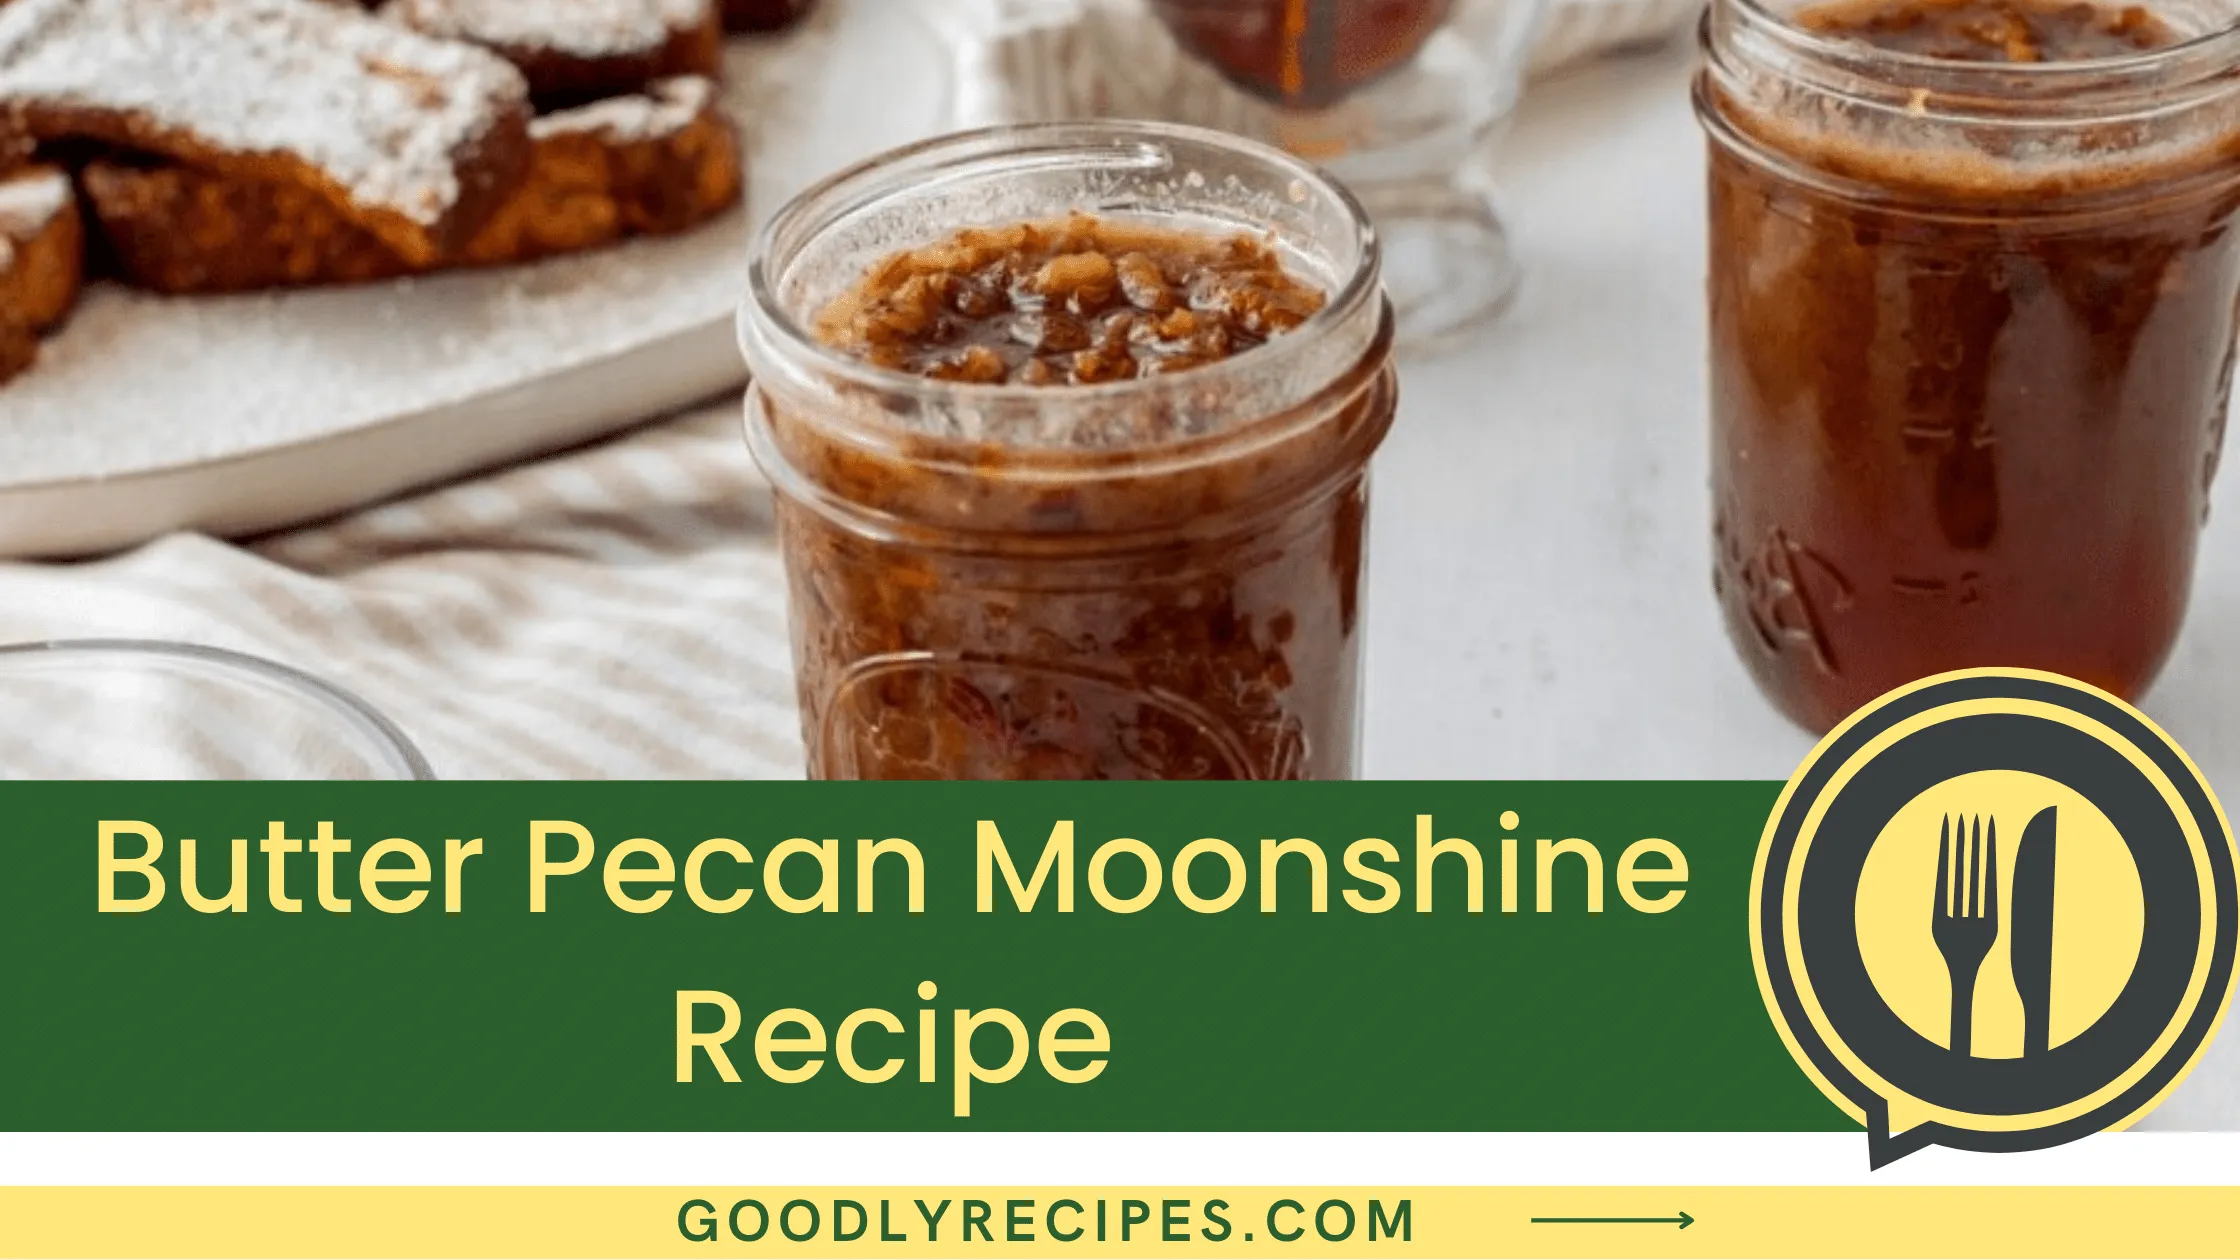 What Is Butter Pecan Moonshine?